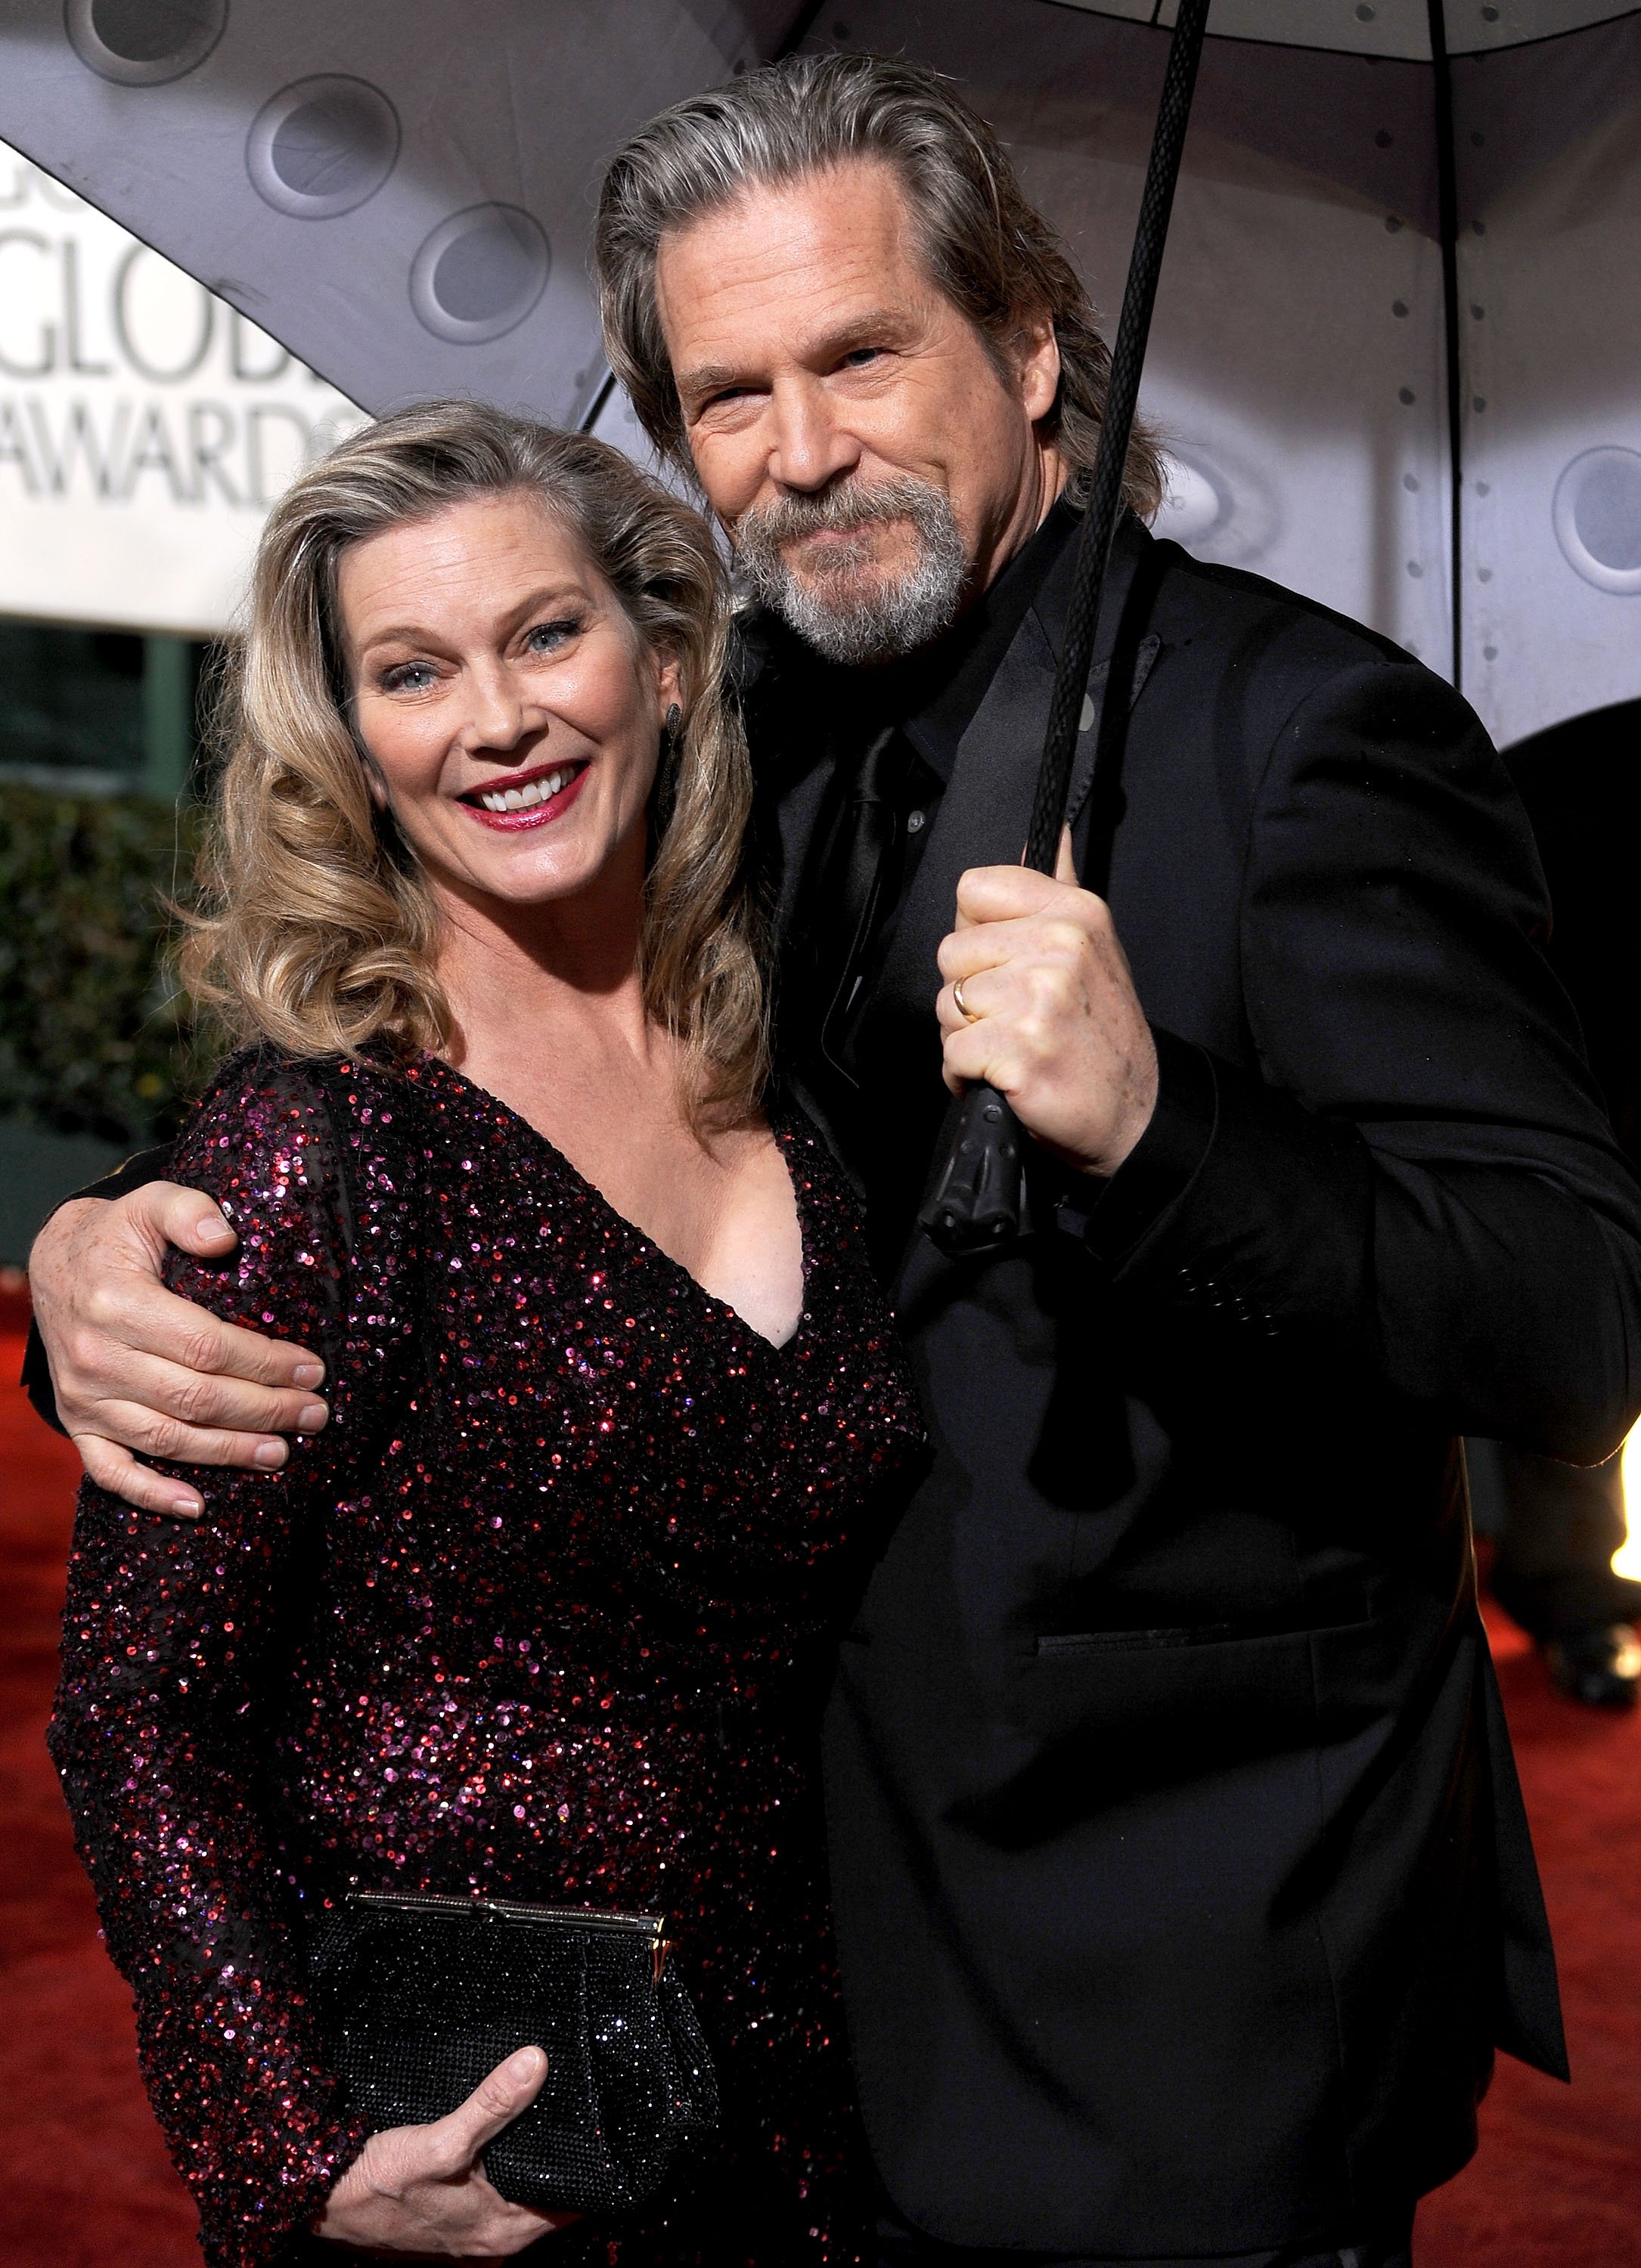 Actor Jeff Bridges atnd his wife Susan Bridges at The Beverly Hilton Hotel on January 17, 2010 | Source: Getty Images